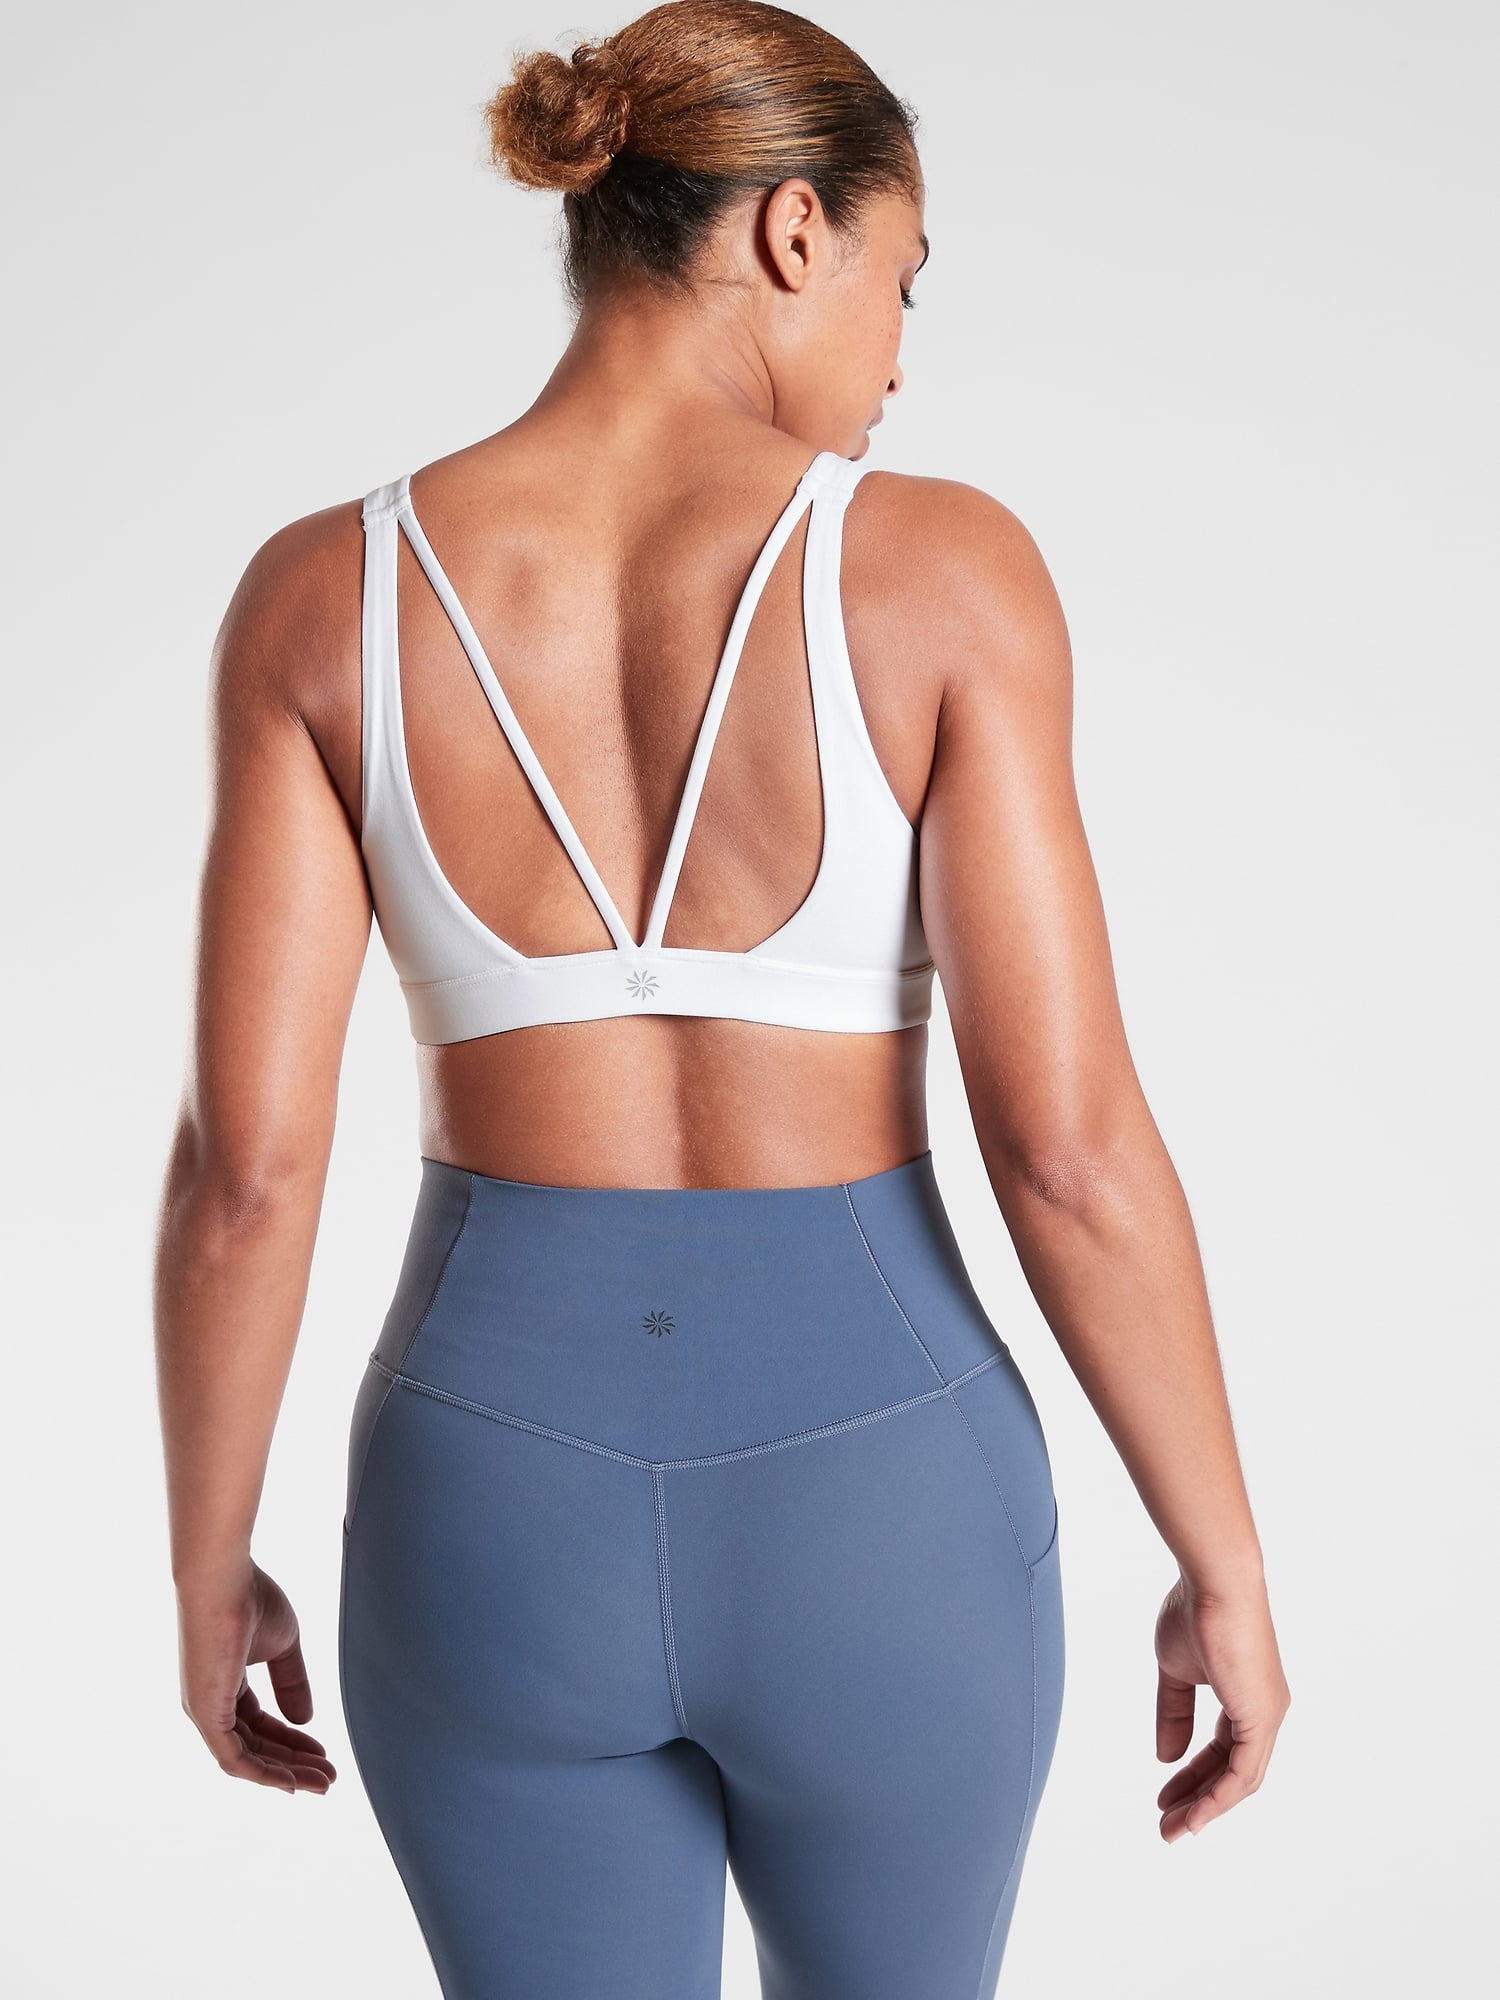 We Compared the Best Athleta Sports Bras Guide